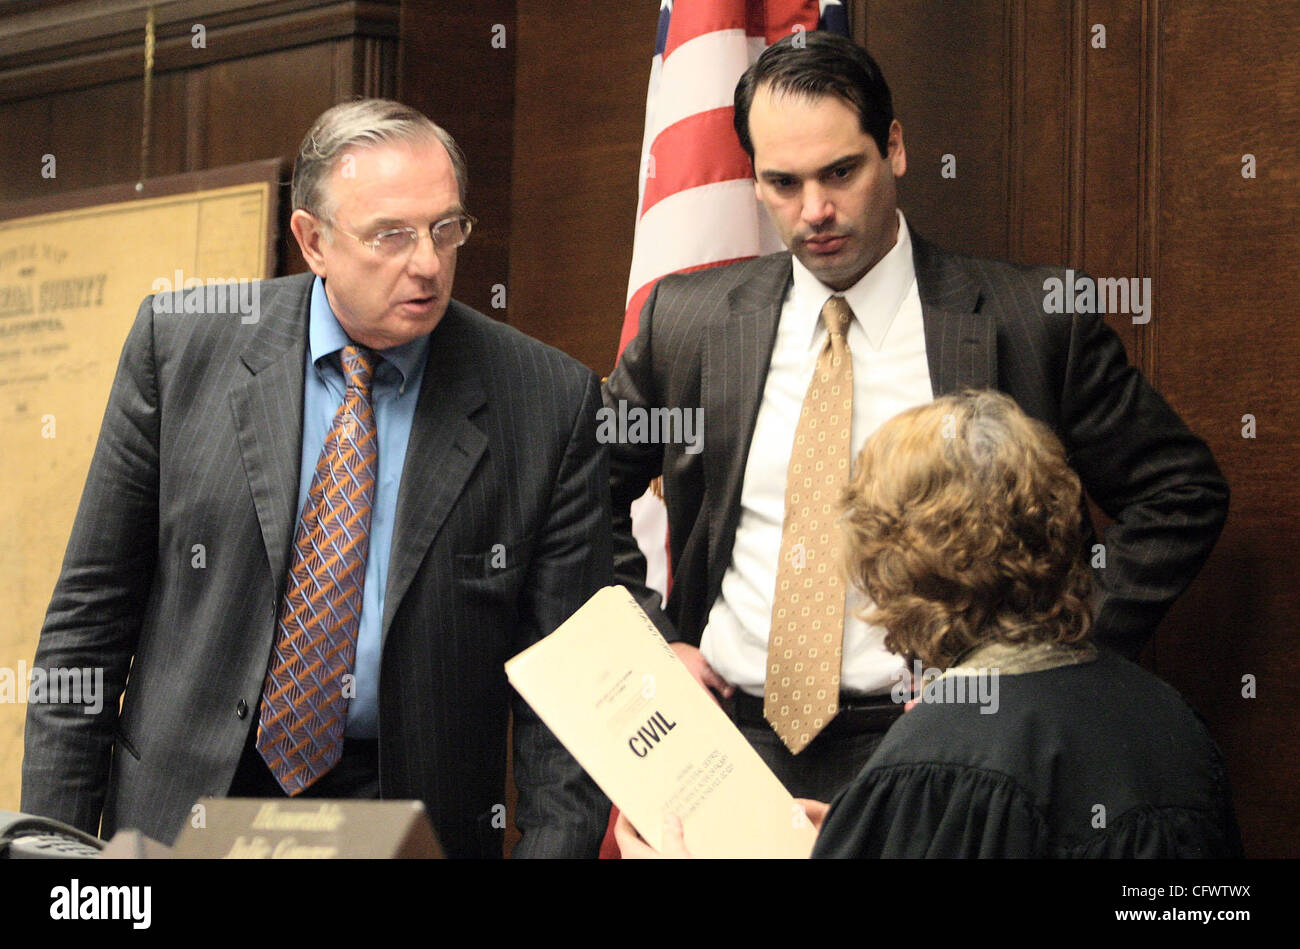 Mar 09, 2007 - Oakland, CA, USA - Hans Reiser's attorney, WILLIAM DUBOIS , and prosecutor, GREG DOLGE approach Superior Court Judge, JULIE CONGER, during the hearing to decide there is enough evidence for a murder trail against Hans Reiser in the murder of his ex-wife, Nina Reiser at the Rene C. Dav Stock Photo